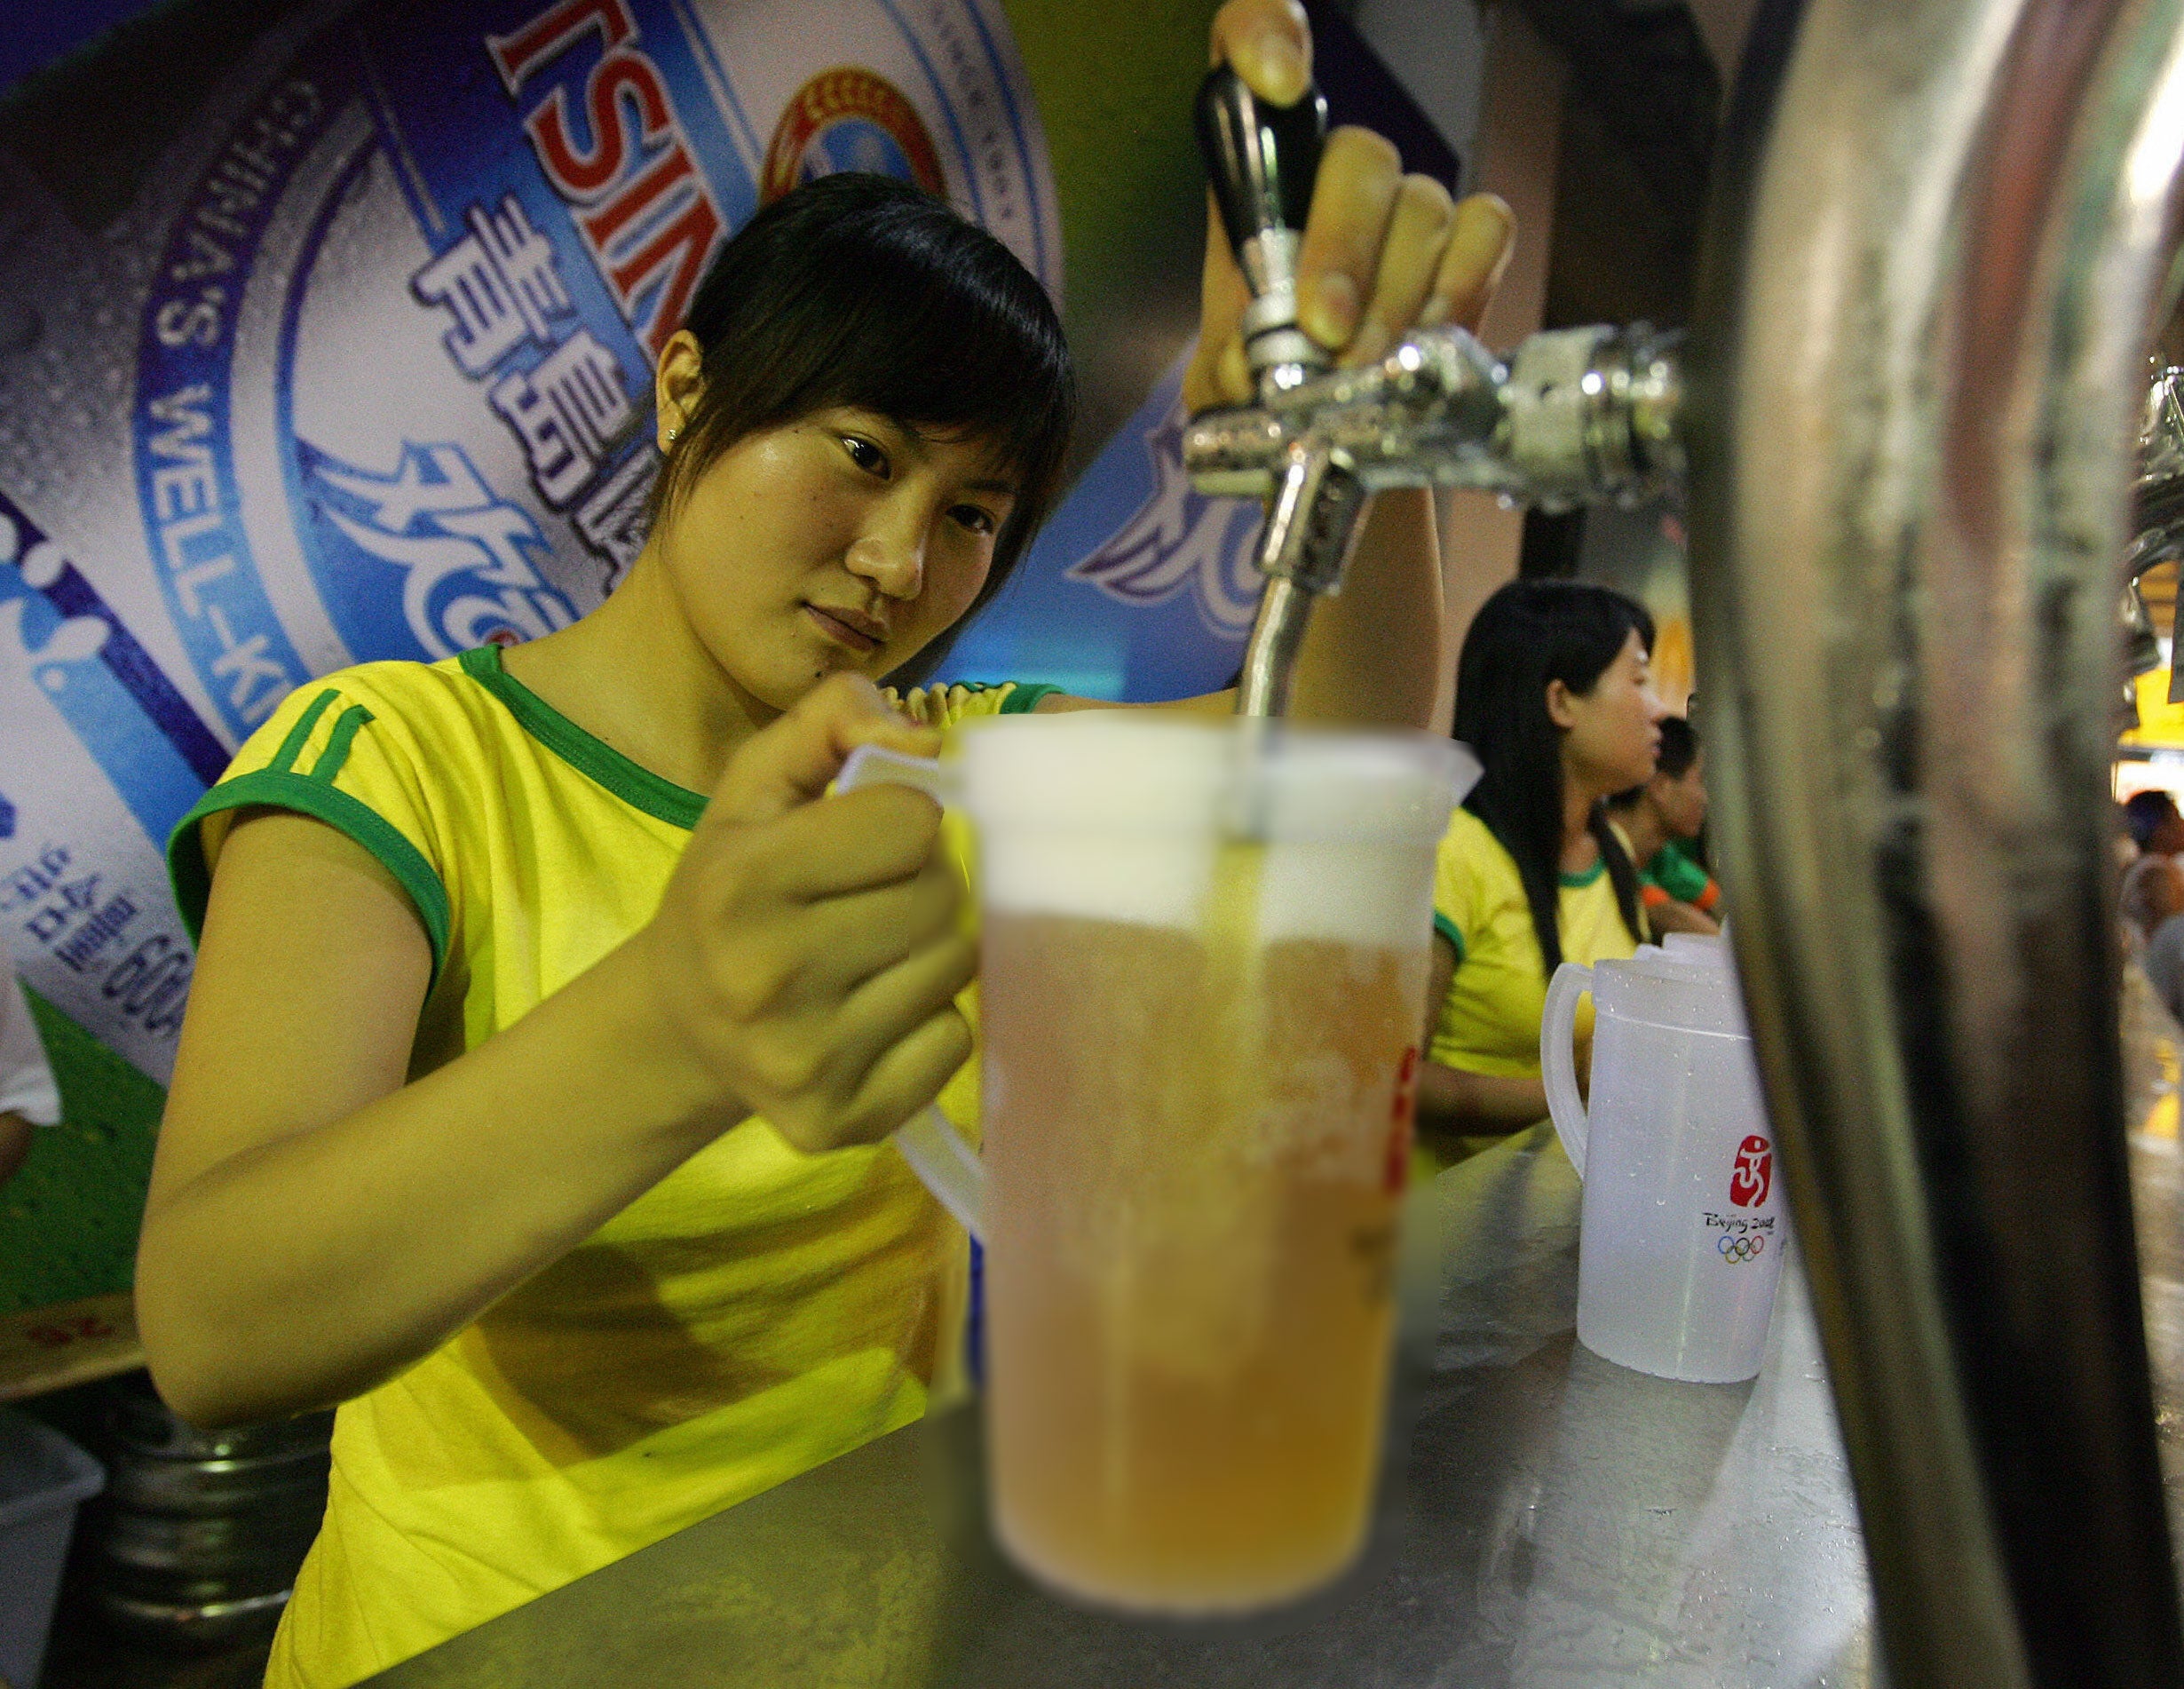 A bartender fills a pitcher of beer at a beer garden in Qingdao, 24 August 2007, in eastern China's Shandong province during the traditional Beer Festival month in the hometown of China's most famous beer, Tsingtao.